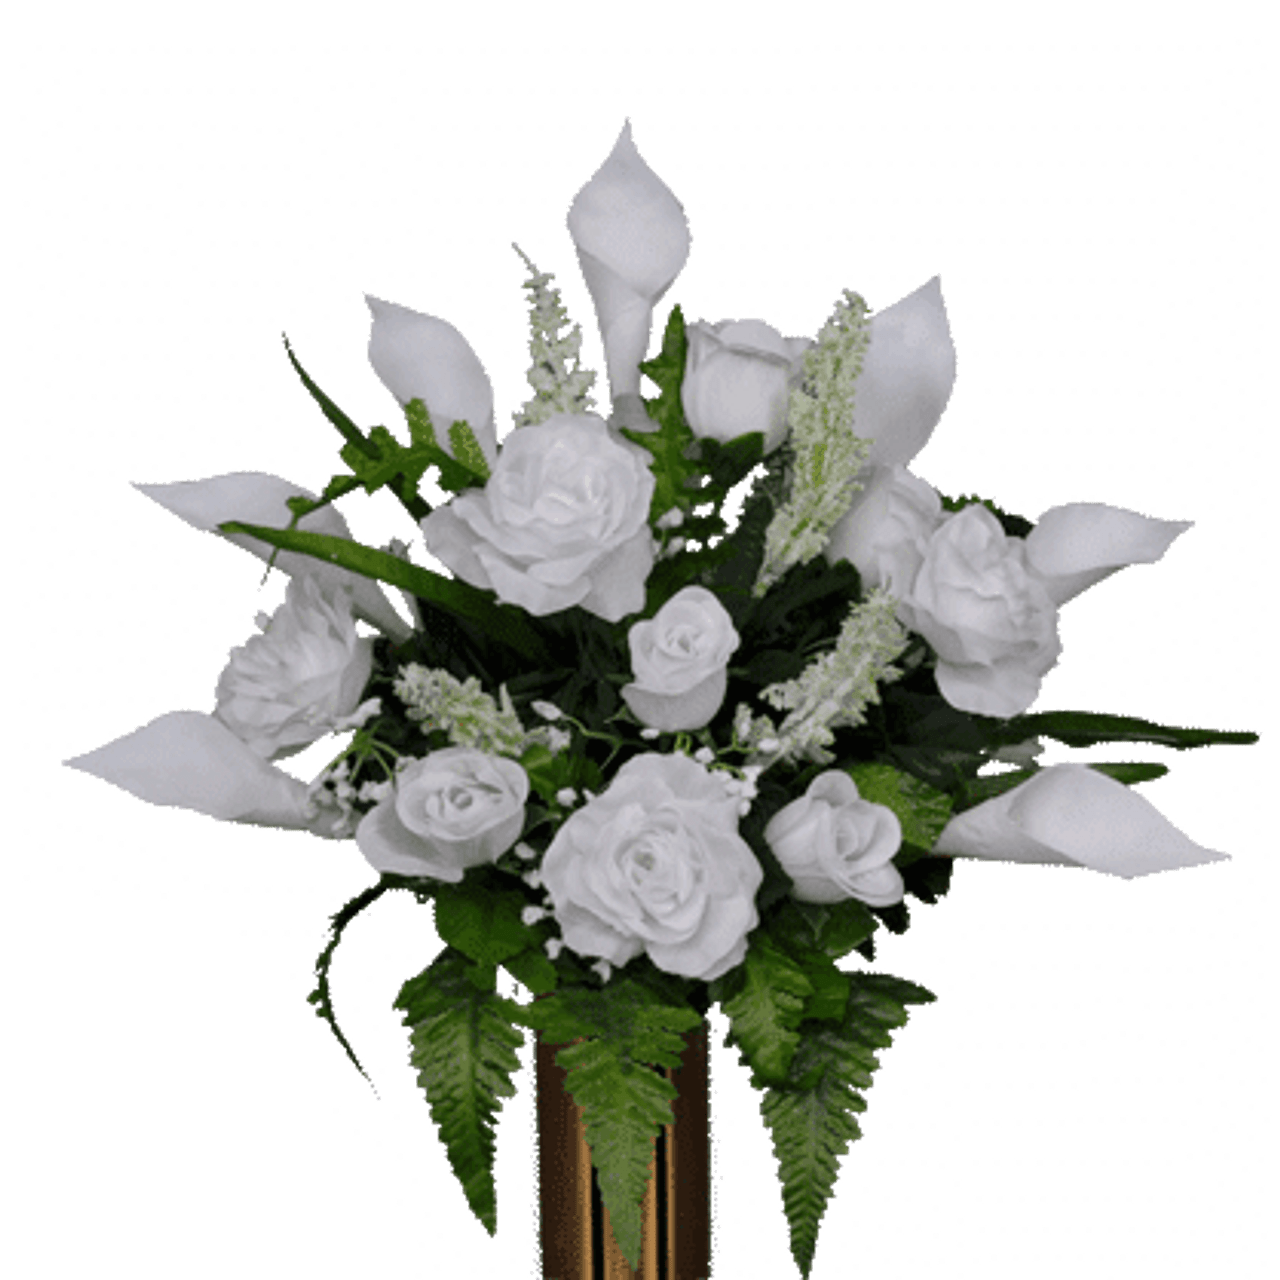 Wholesale White Floral Foam To Decorate Your Environment 